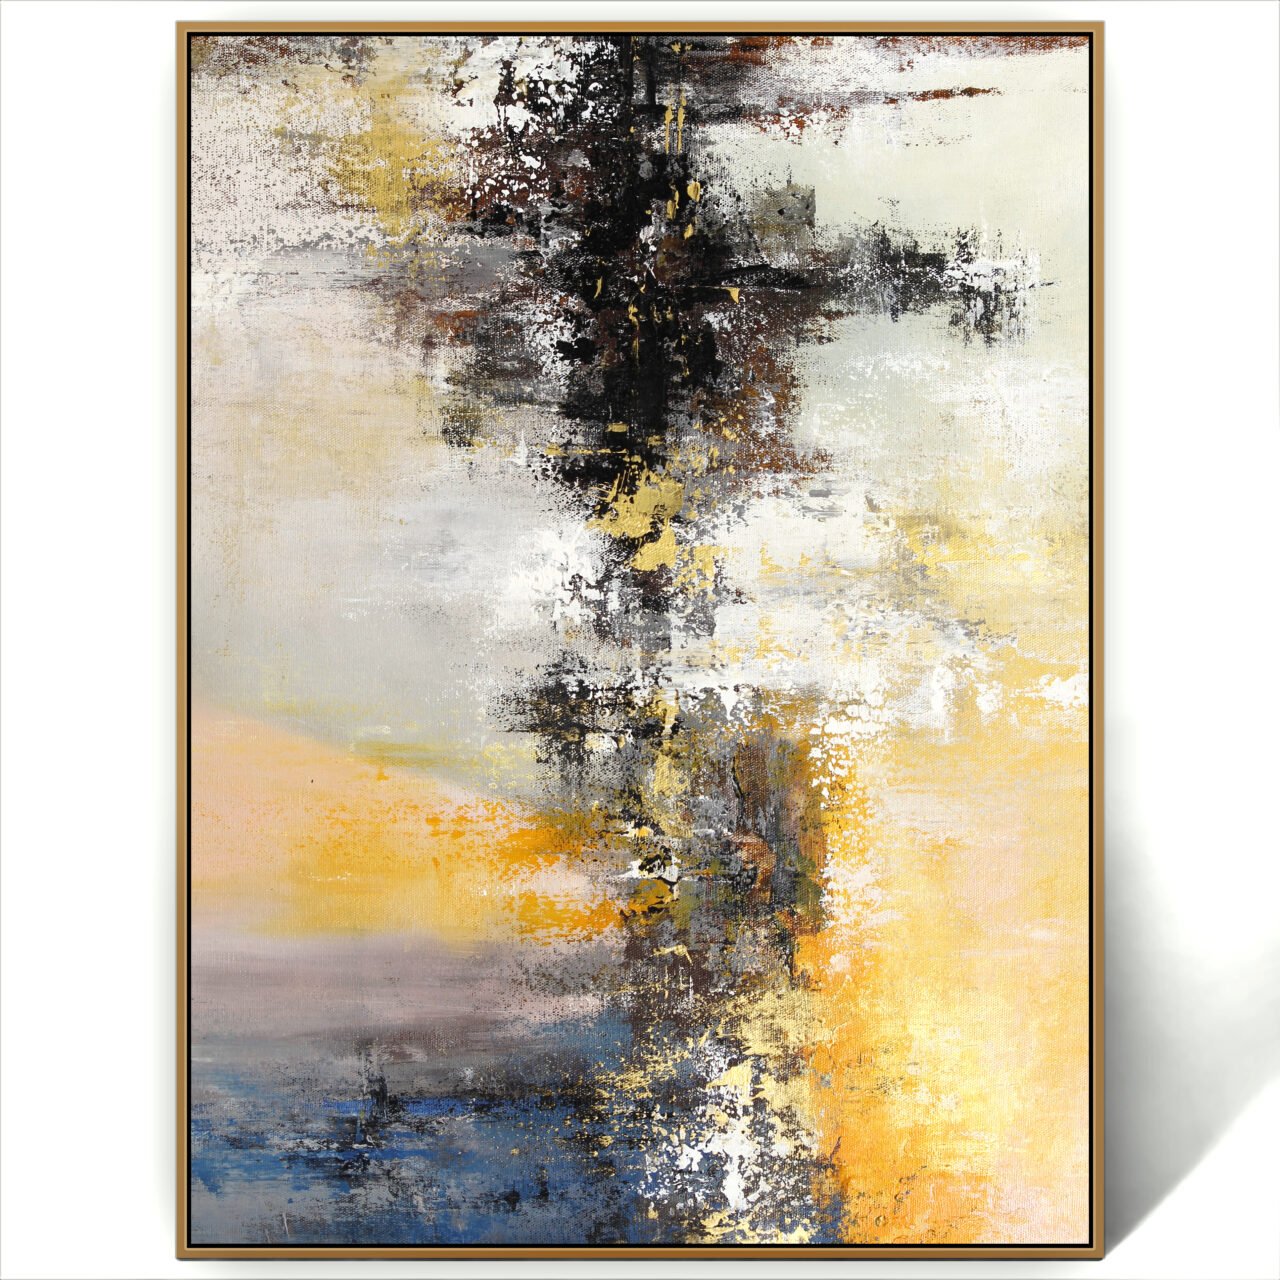 Abstract Wall Hanging Art On Canvas Room Wall Decor Painting